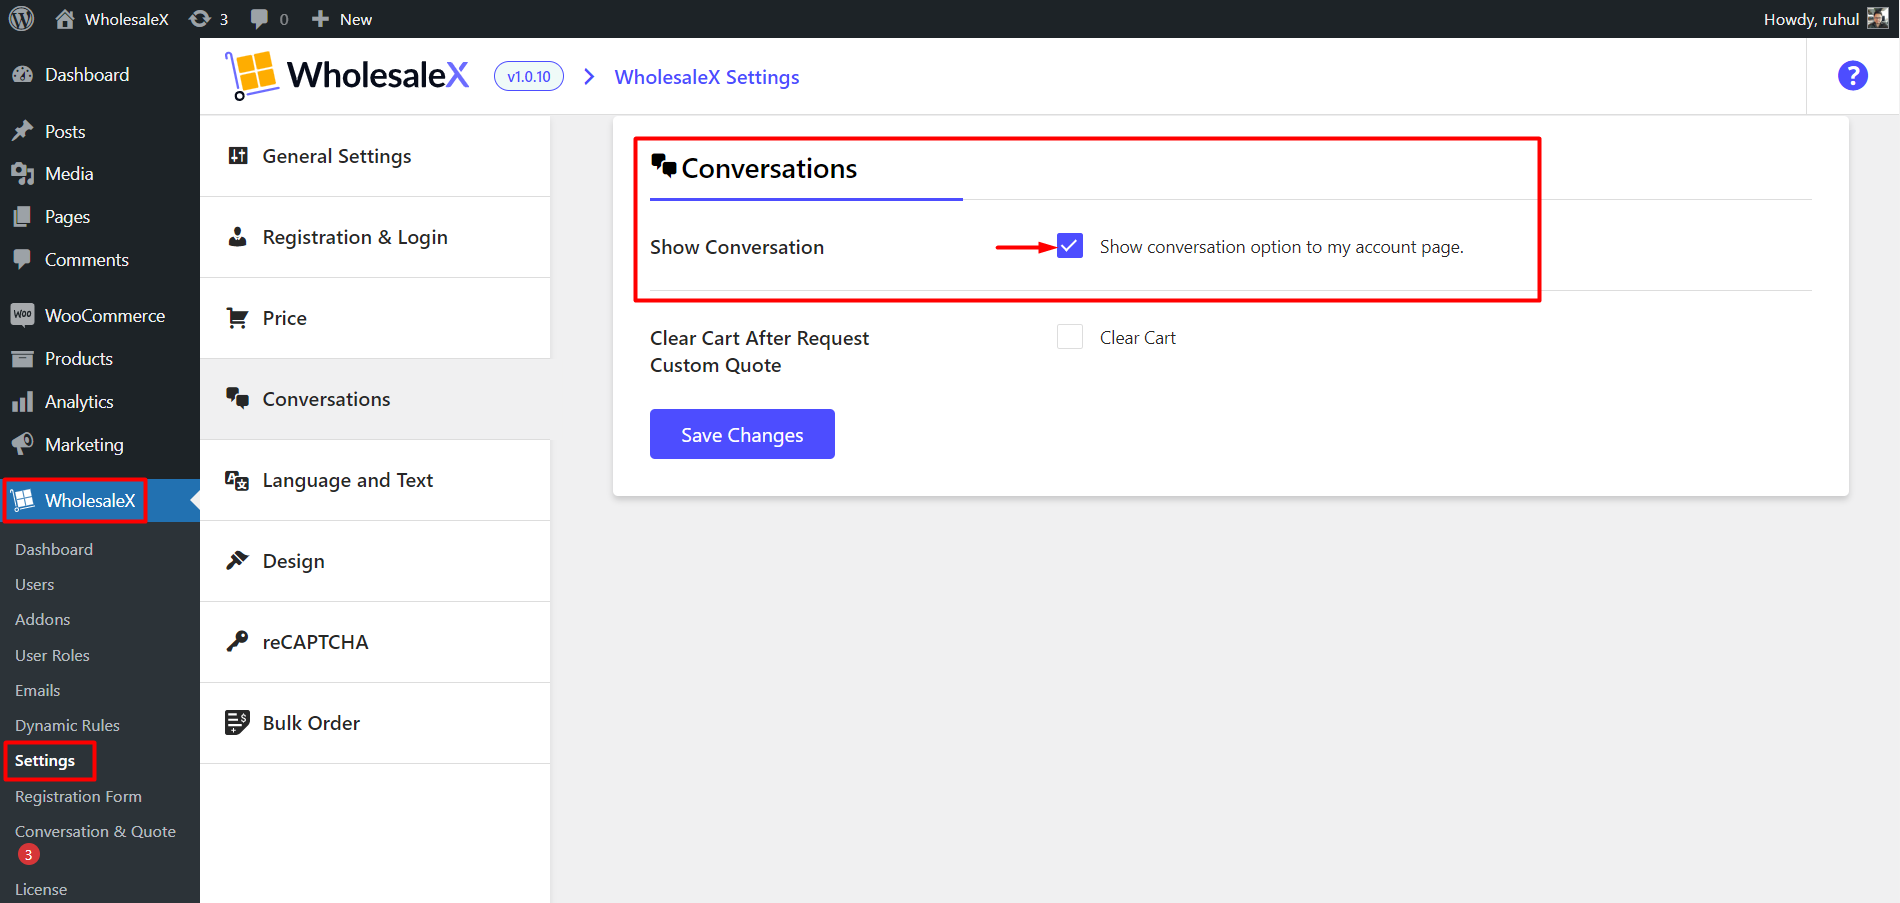 Activating Conversation Option in My Account Page